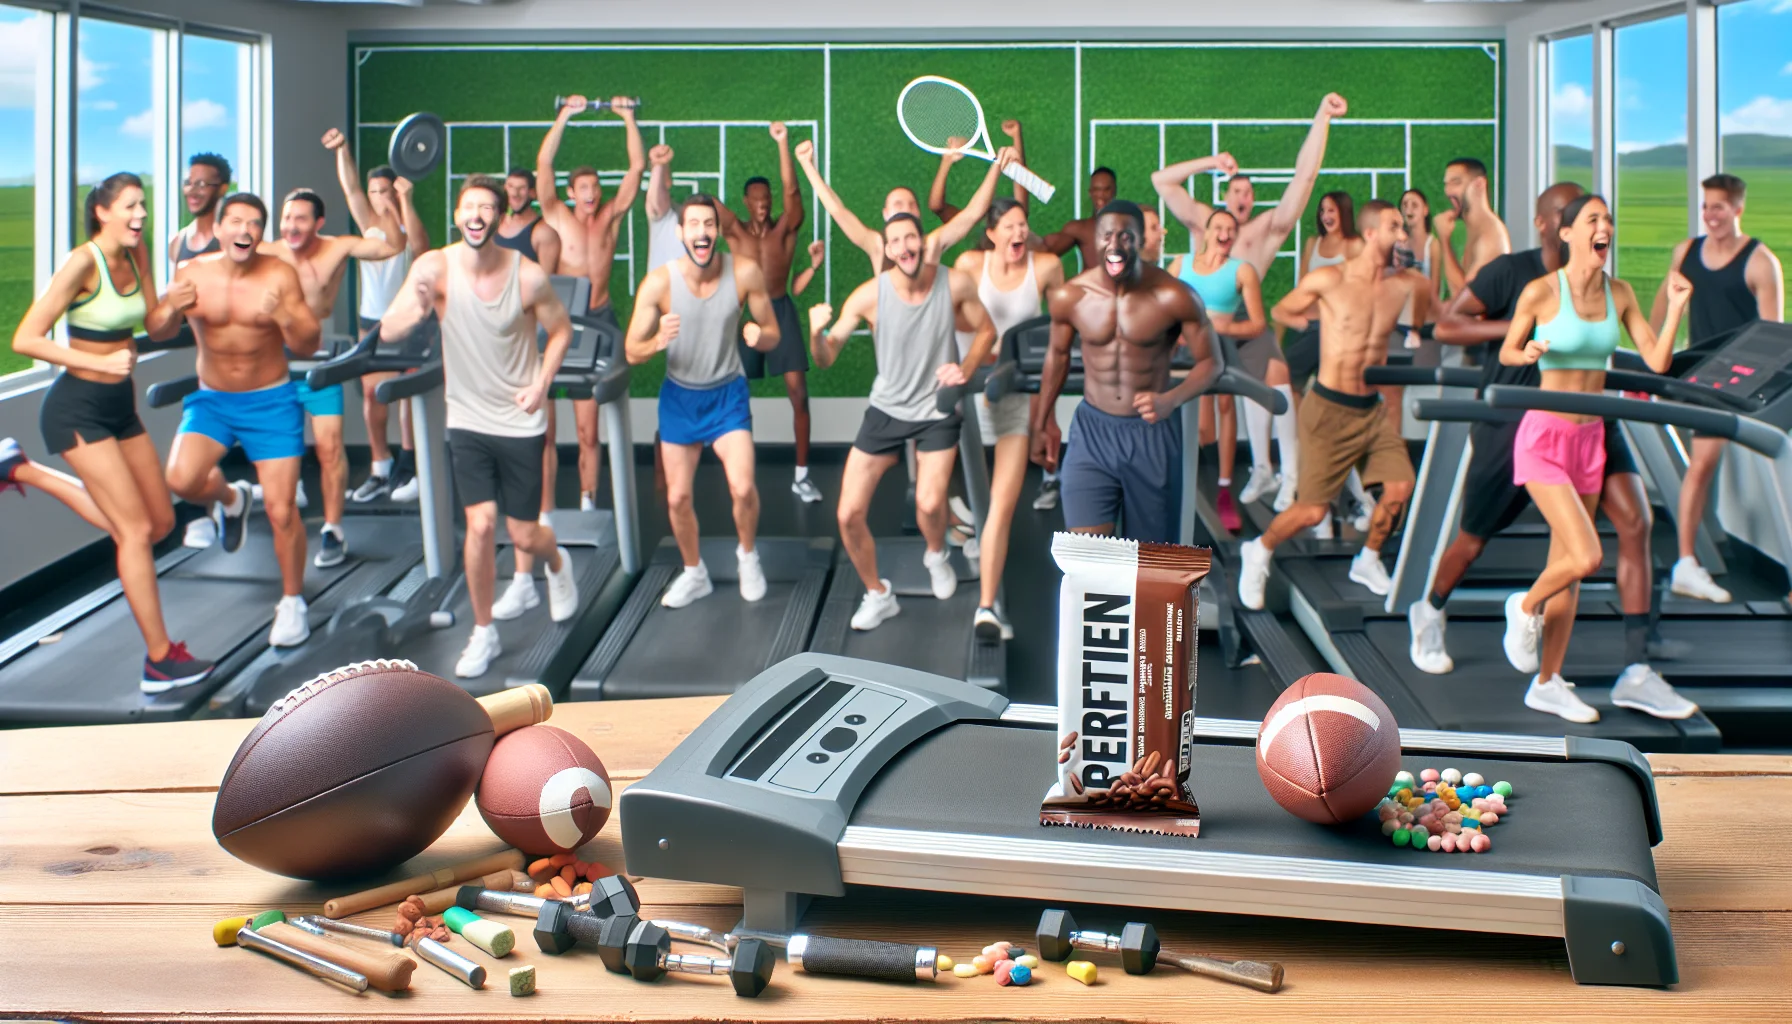 Craft a humorous and enticing scenario featuring generic protein bars placed on a treadmill, with several sports equipment tossed around such as a football, tennis racket, and dumbbells. Behind this scene, in the backdrop, construct an image of a lively gym with diverse demographics of people, portraying different genders and descents; some are working out and others laughing in surprise at the scene in front. The atmosphere is light, encouraging viewers to incorporate supplements into their fitness regimen.